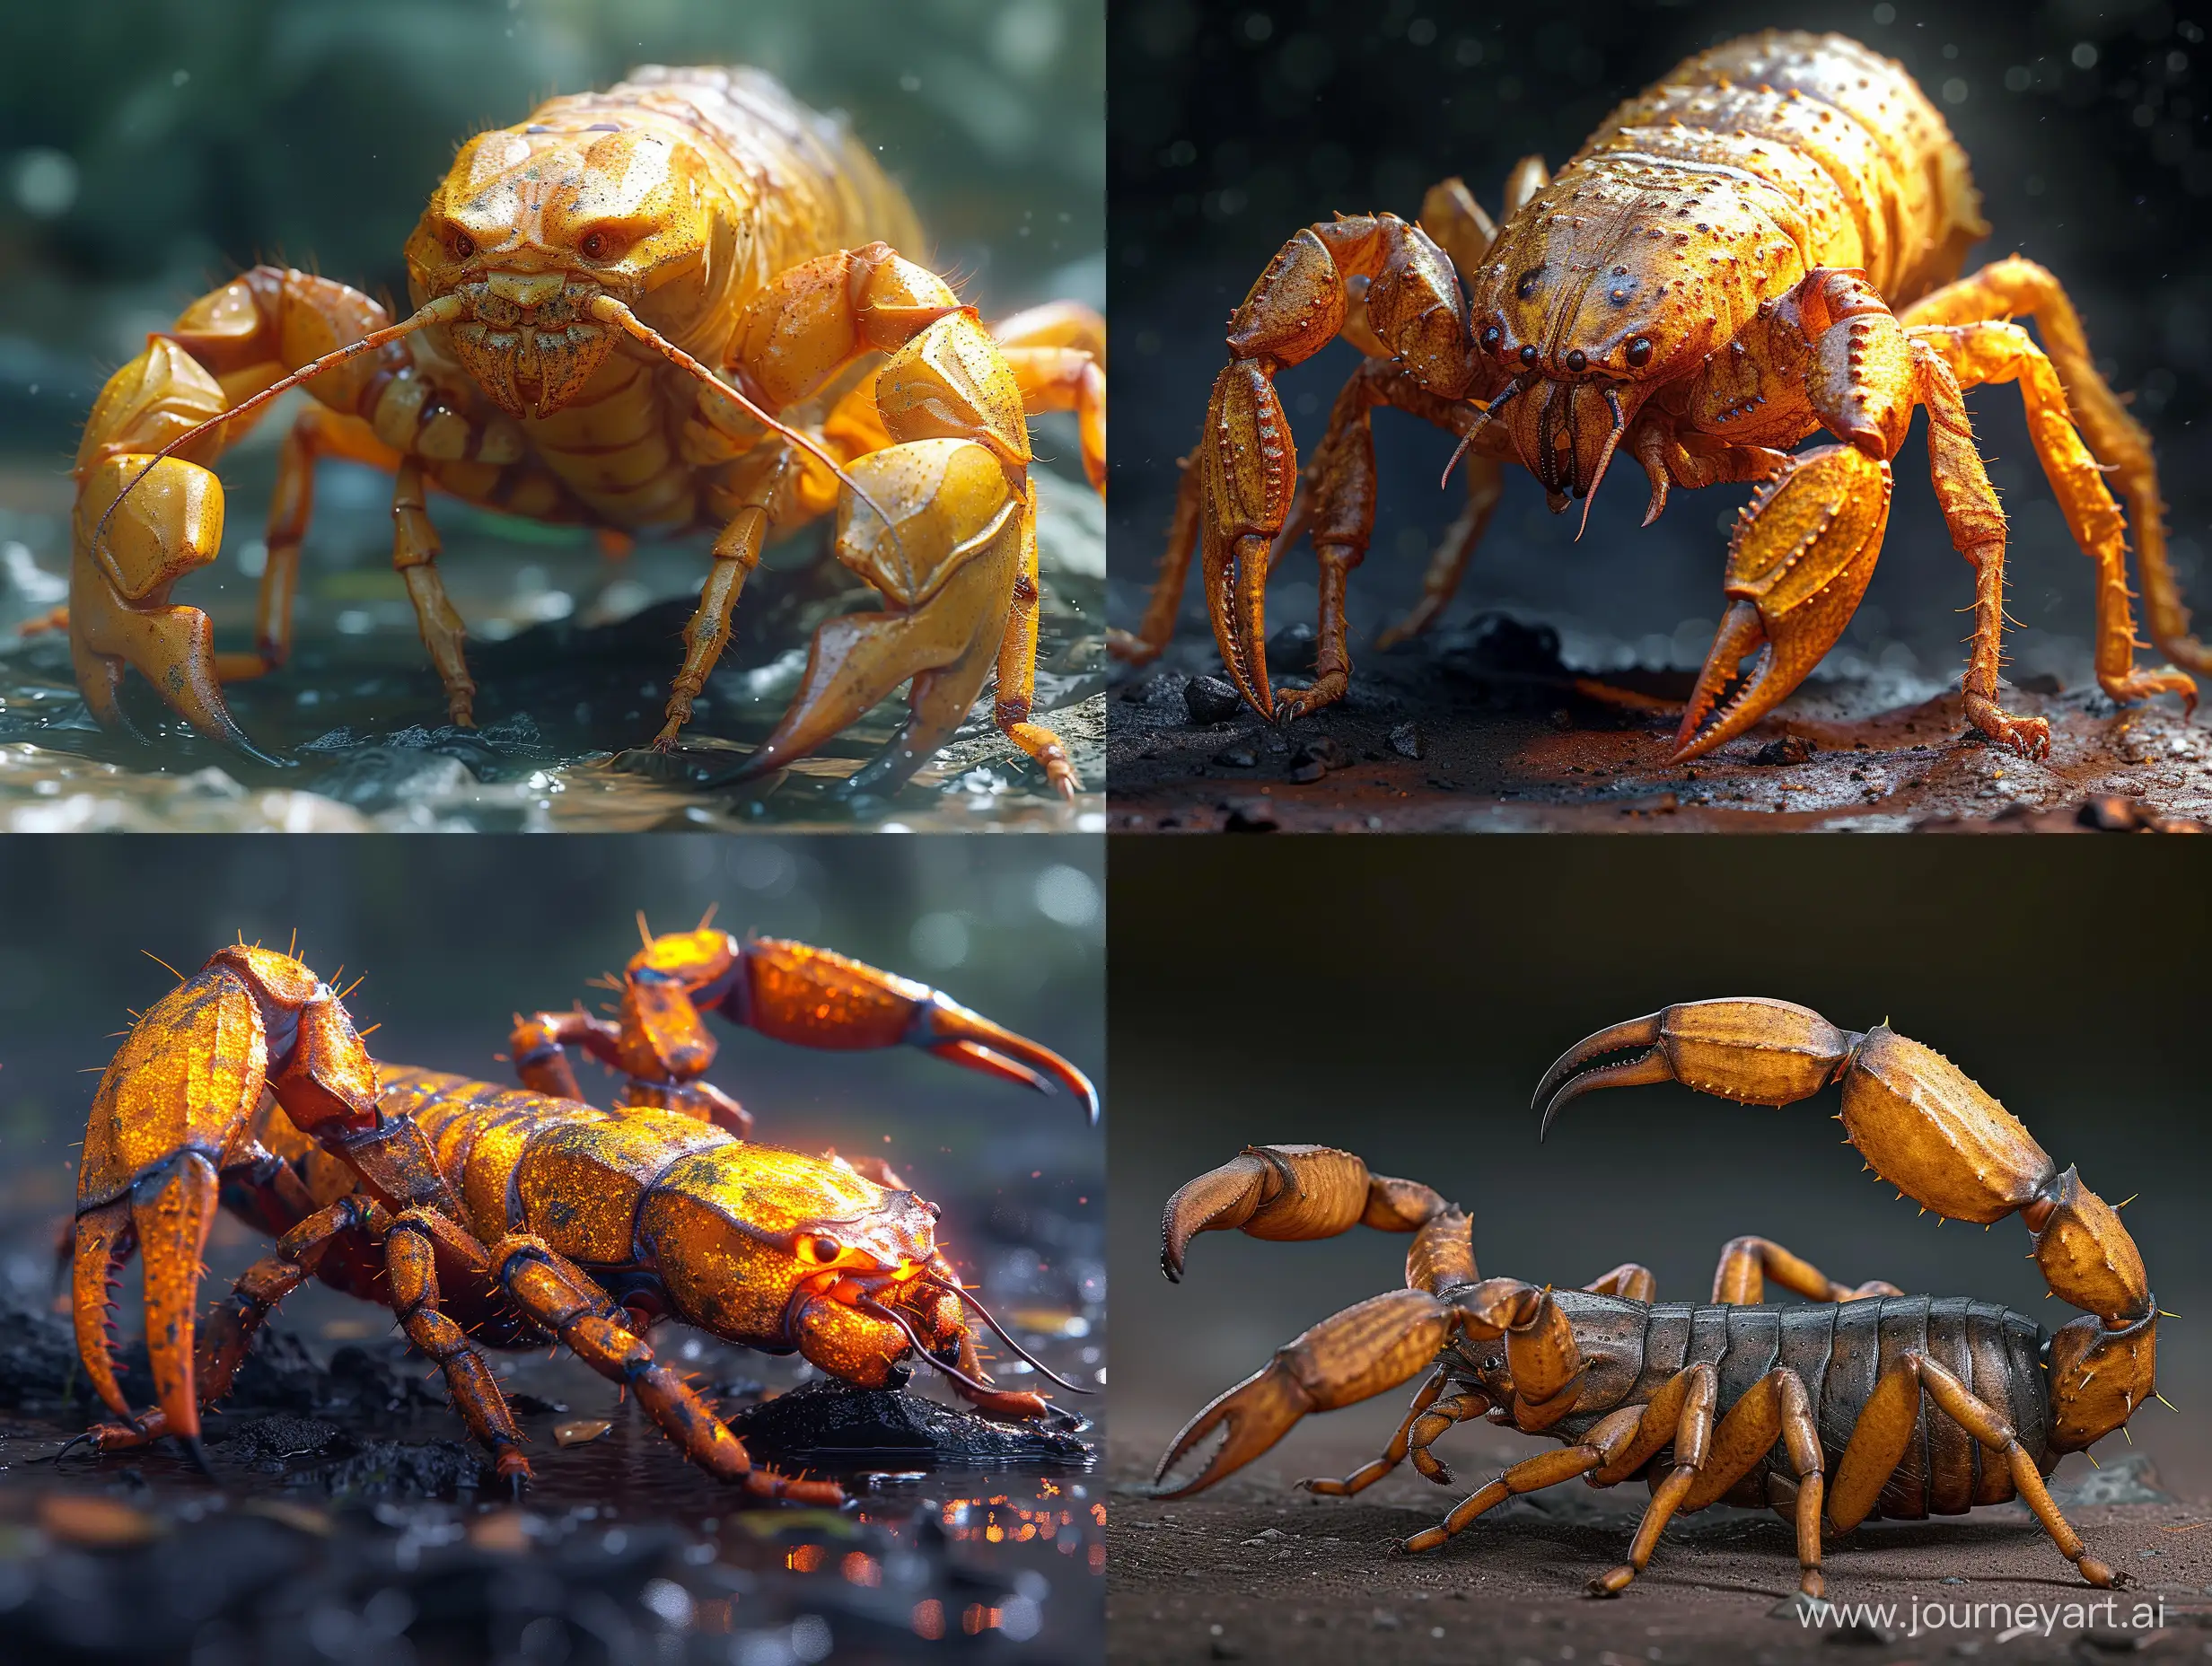 king scorpion. Cinematic, Photoshoot, Shot on 25mm lens, Depth of Field, Tilt Blur, Shutter Speed 1/1000, F/22, White Balance, 32k, Super-Resolution, Pro Photo RGB, Half rear Lighting, Backlight, Dramatic Lighting, Incandescent, Soft Lighting, Volumetric, Conte-Jour, Global Illumination, Screen Space Global Illumination, Scattering, Shadows, Rough, Shimmering, Lumen Reflections, Screen Space Reflections, Diffraction Grading, Chromatic Aberration, GB Displacement, Scan Lines, Ambient Occlusion, Anti-Aliasing, FKAA, TXAA, RTX, SSAO, OpenGL-Shader’s, Post Processing, Post-Production, Cell Shading, Tone Mapping, CGI, VFX, SFX, insanely detailed and intricate, hyper maximalist, elegant, dynamic pose, photography, volumetric, ultra-detailed, intricate details, super detailed hyper ultra realistic action with hyper realistic skin details. Cinematic action pose. --v 6.0 --s 250